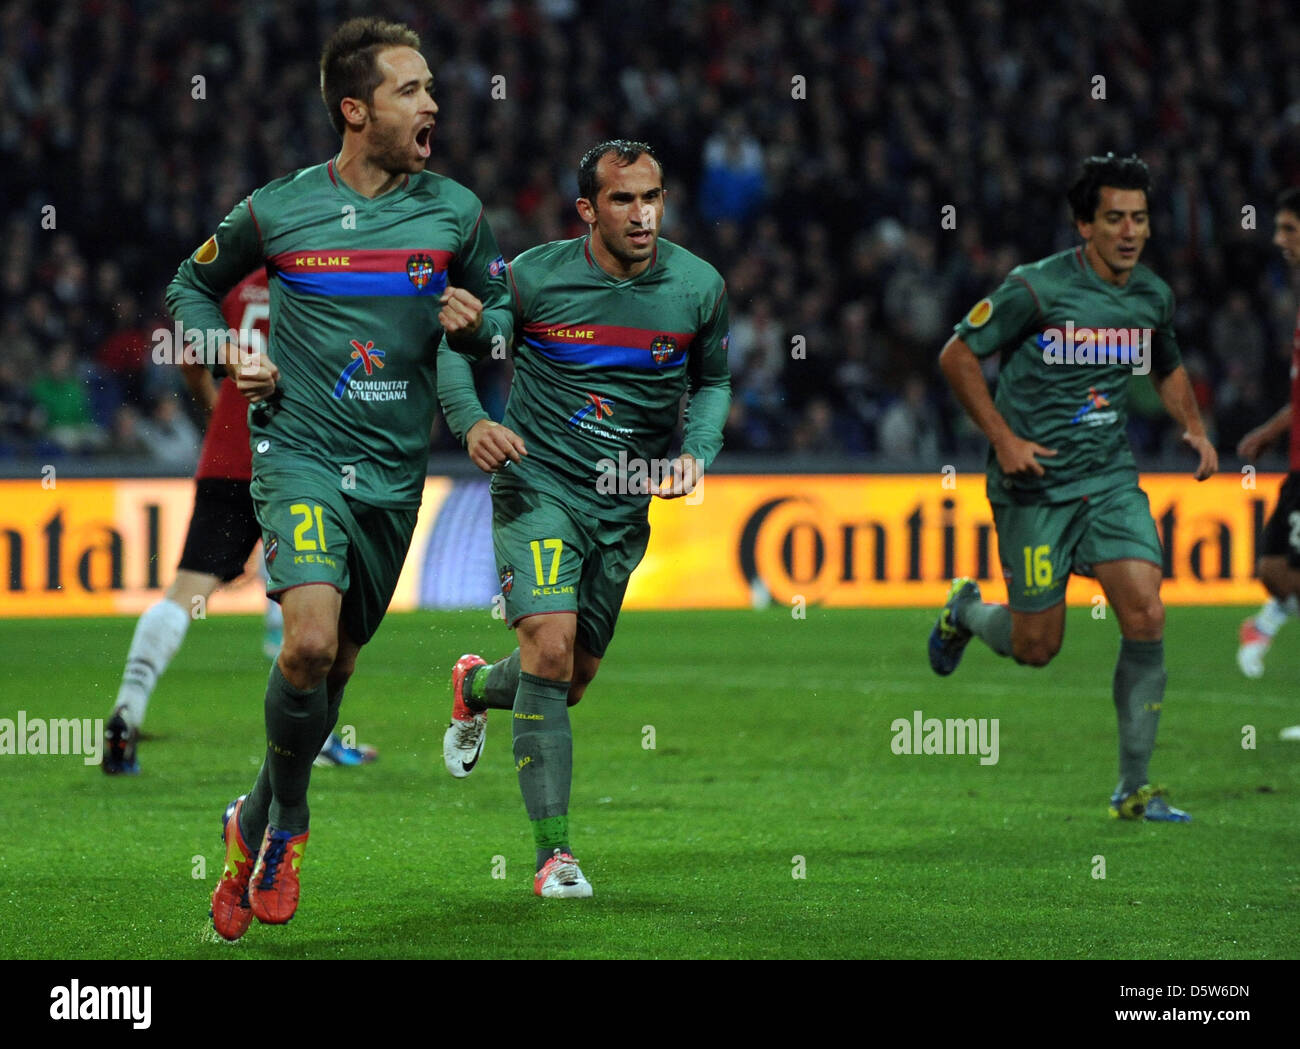 Levante's Michel (L) celebrates with Pedro Rios (R) and Theofanis Gekas after scoring the 1-0 during their Europa League Group L soccer match between Hannover 96 and Spanish Levante UD at Hannover Arena in Hanover, Germany, 04 October 2012. Photo: Peter Steffen/dpa  +++(c) dpa - Bildfunk+++ Stock Photo